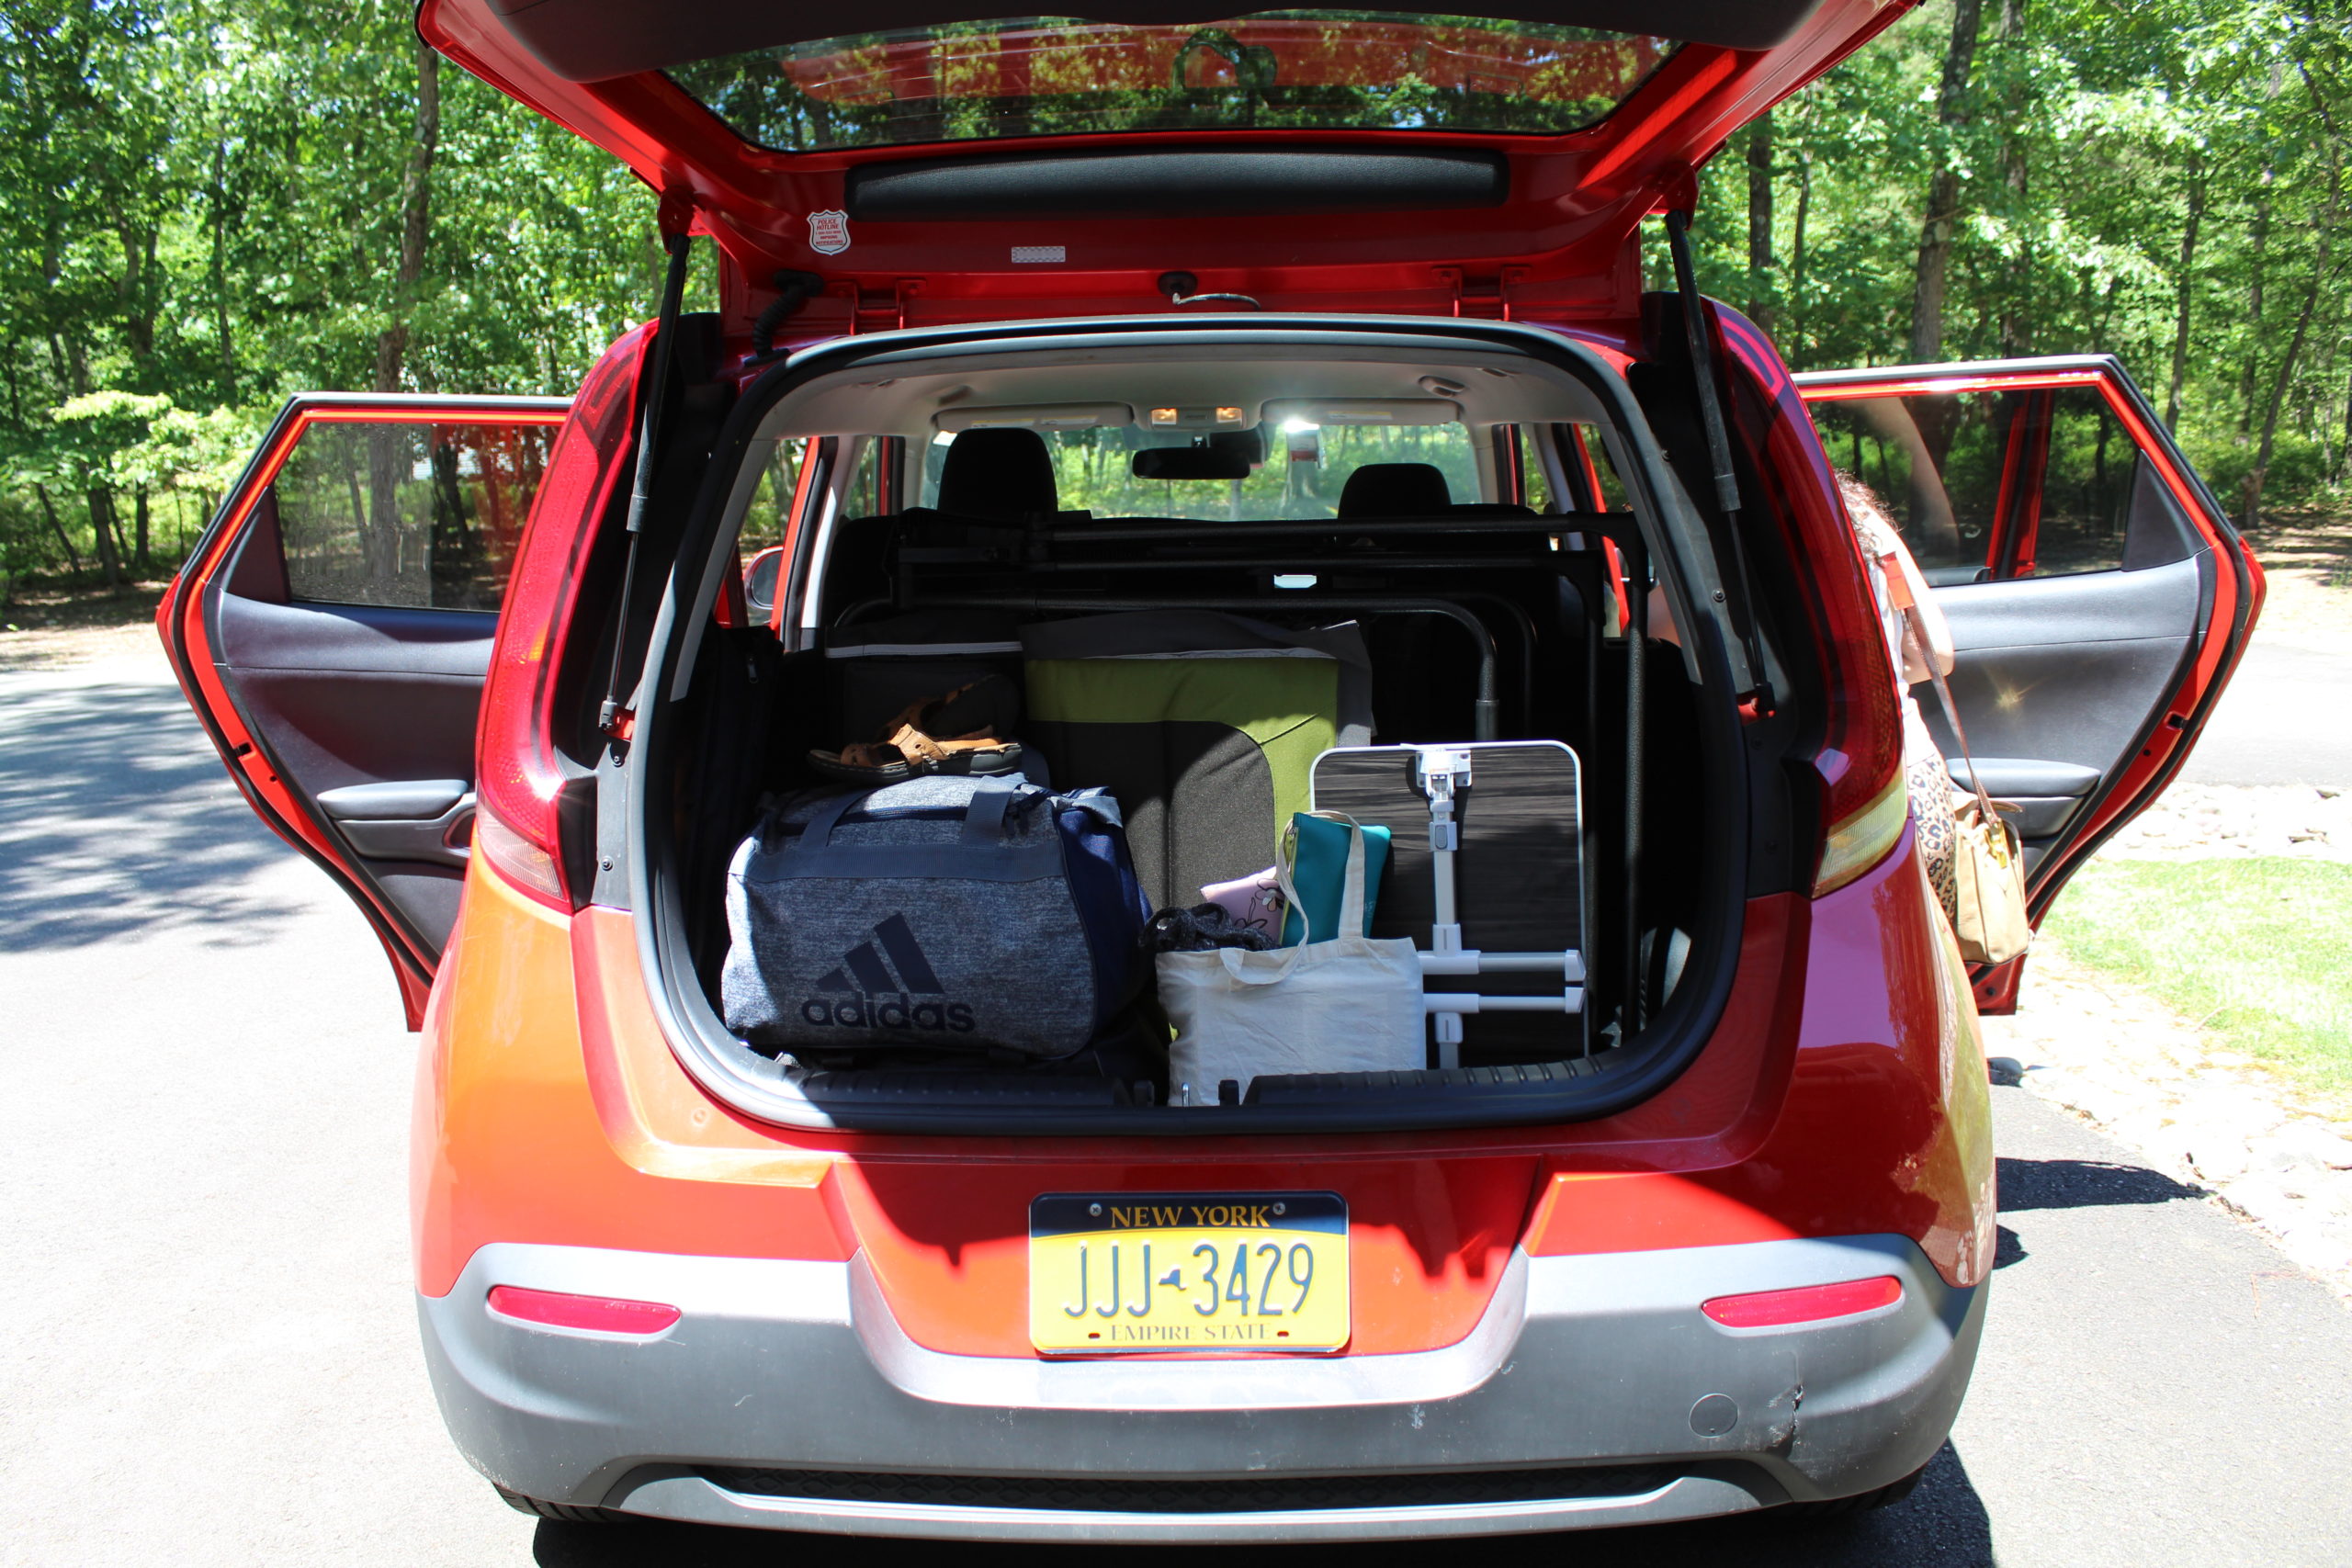 [Photo: A red hatchback car with the doors and trunk open, in the back, there is luggage and supplies.]